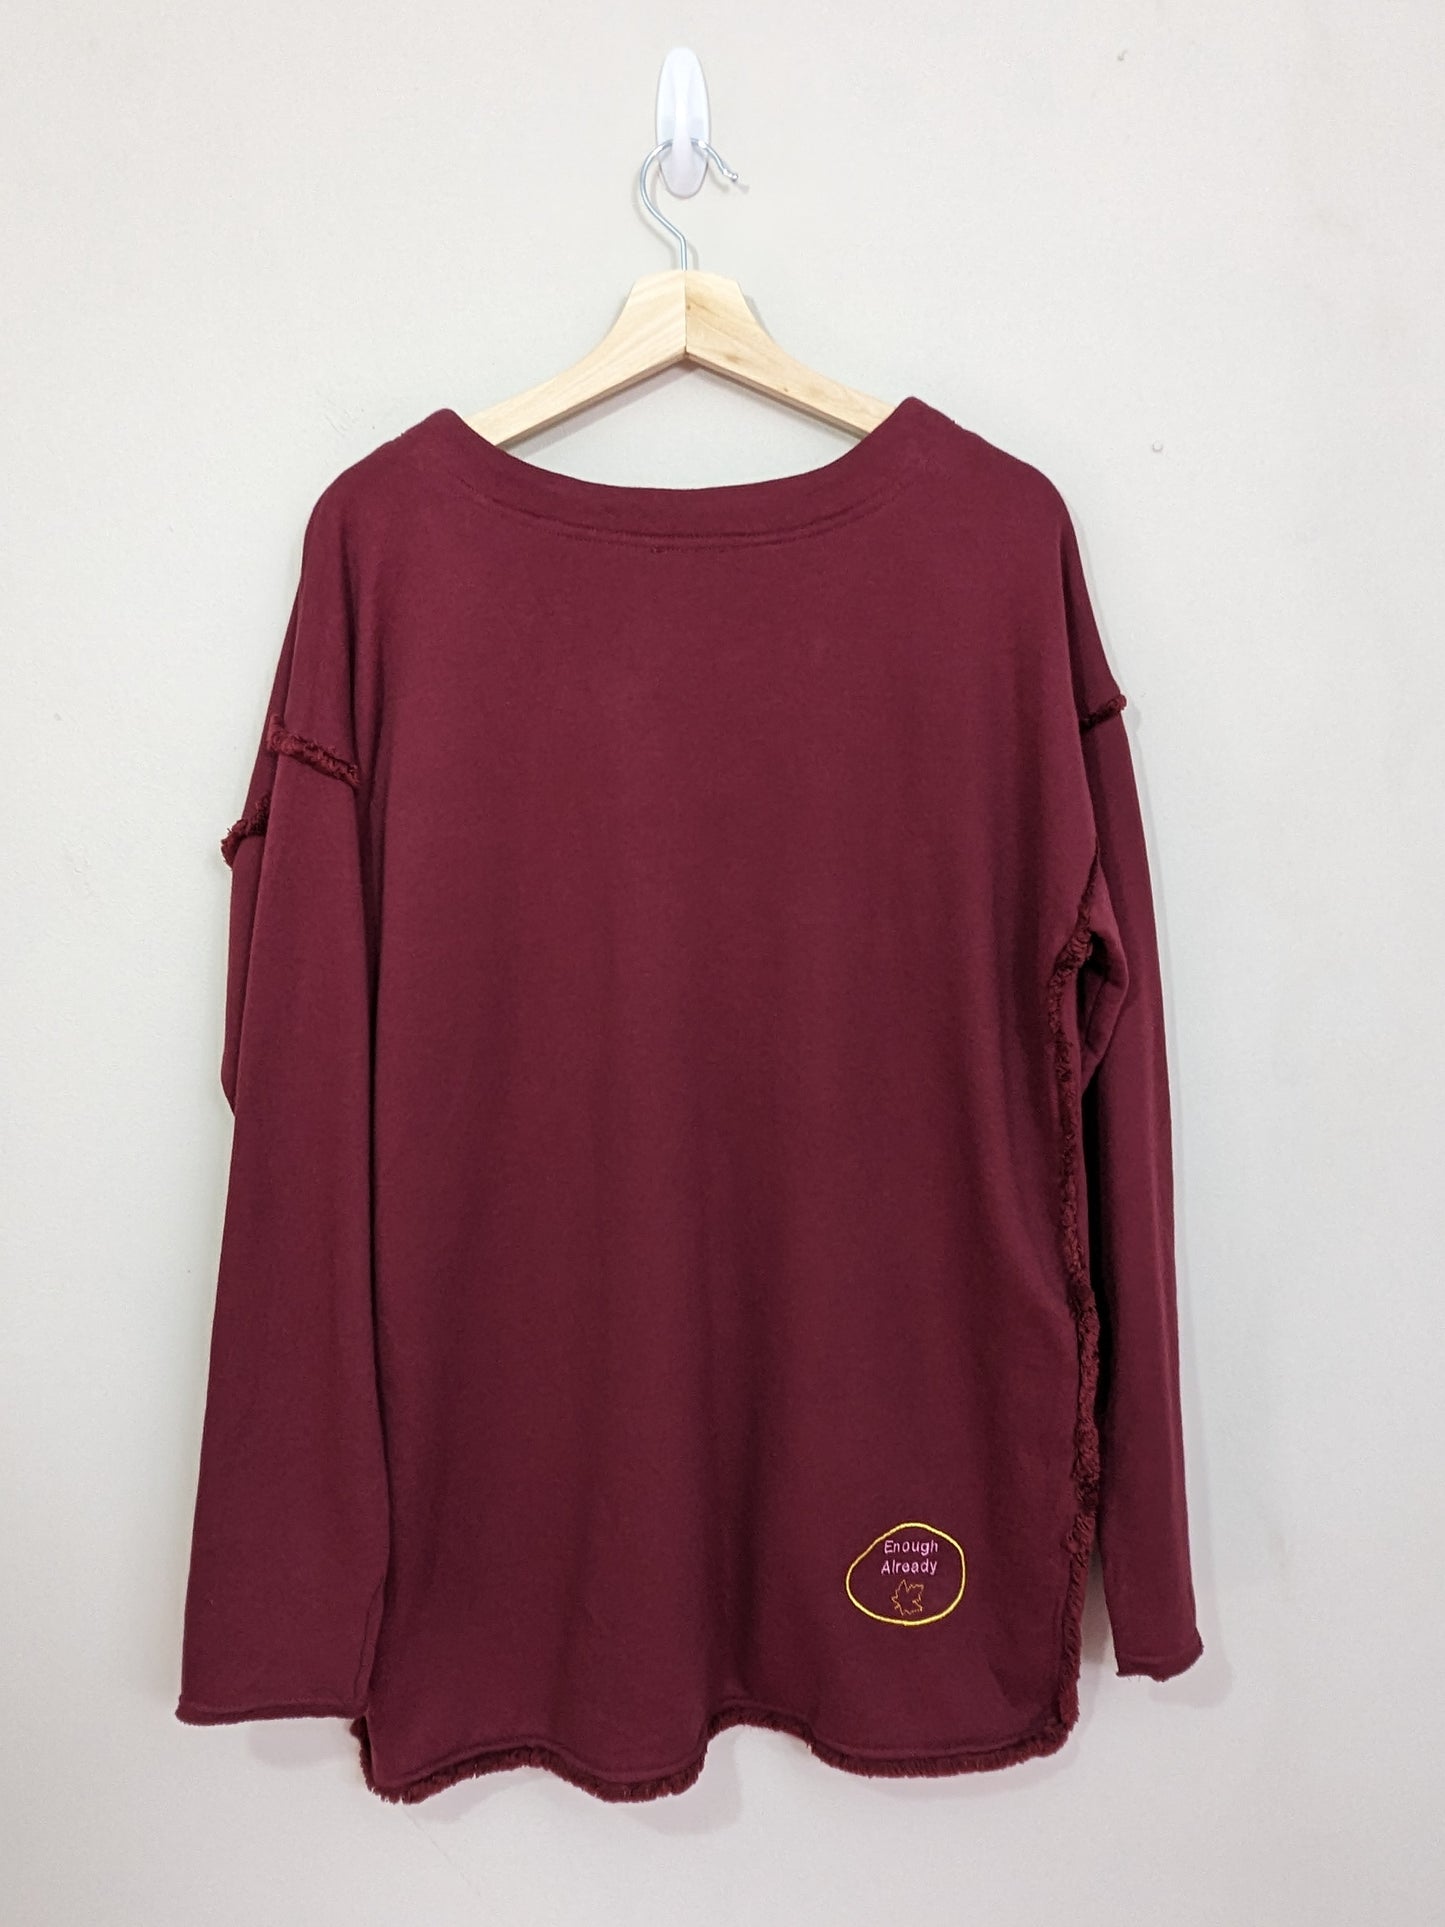 Size Women's Medium Reworked Burgundy Longline Tunic with Embroidered Autumnal Bookish Quote